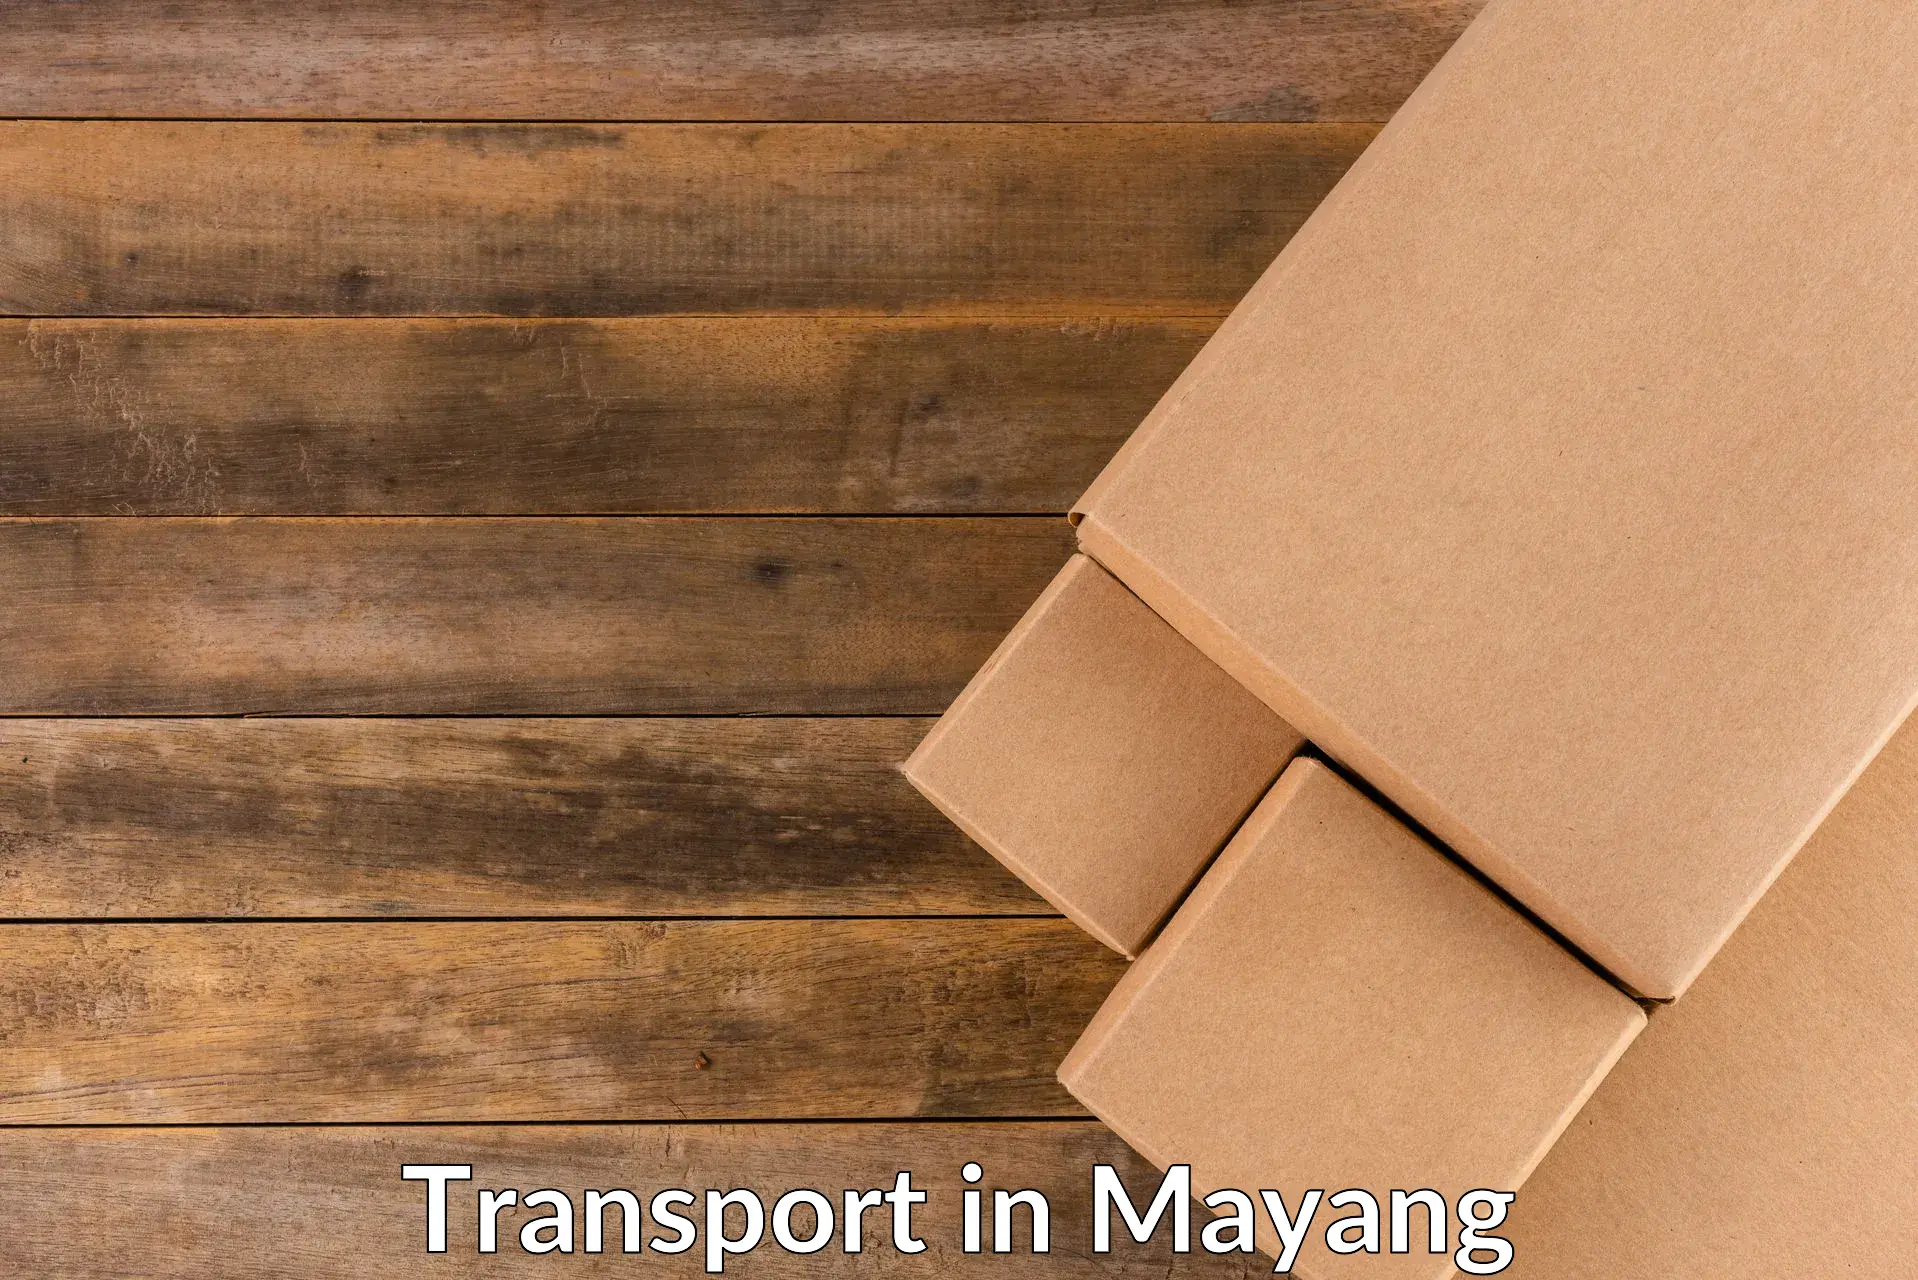 Online transport service in Mayang